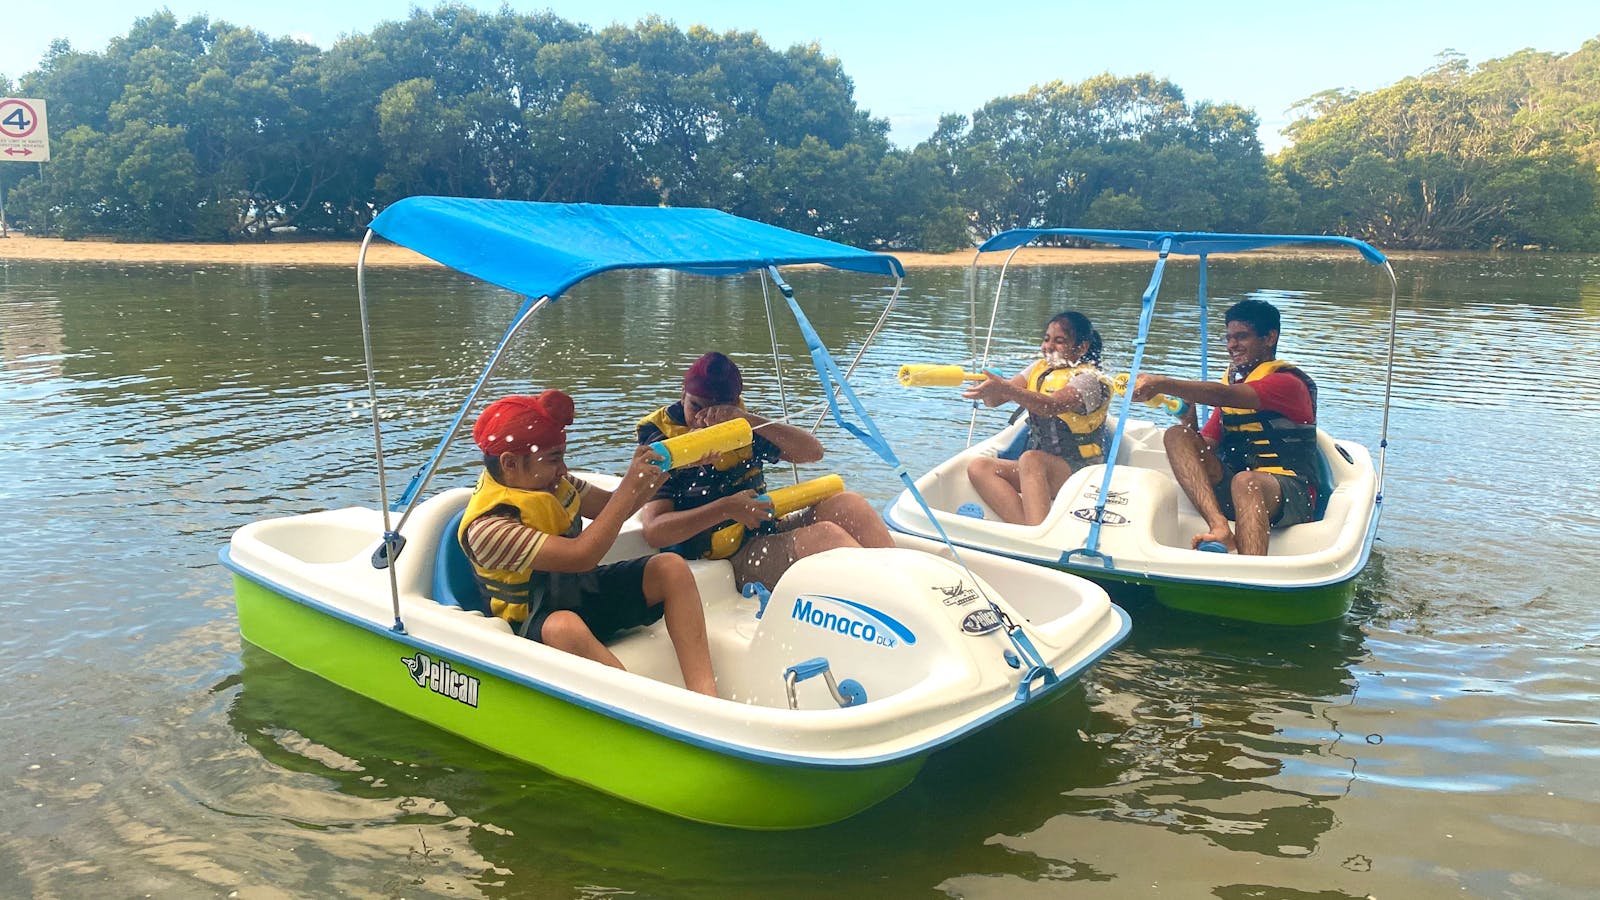 Water gun action on our pedal boats!